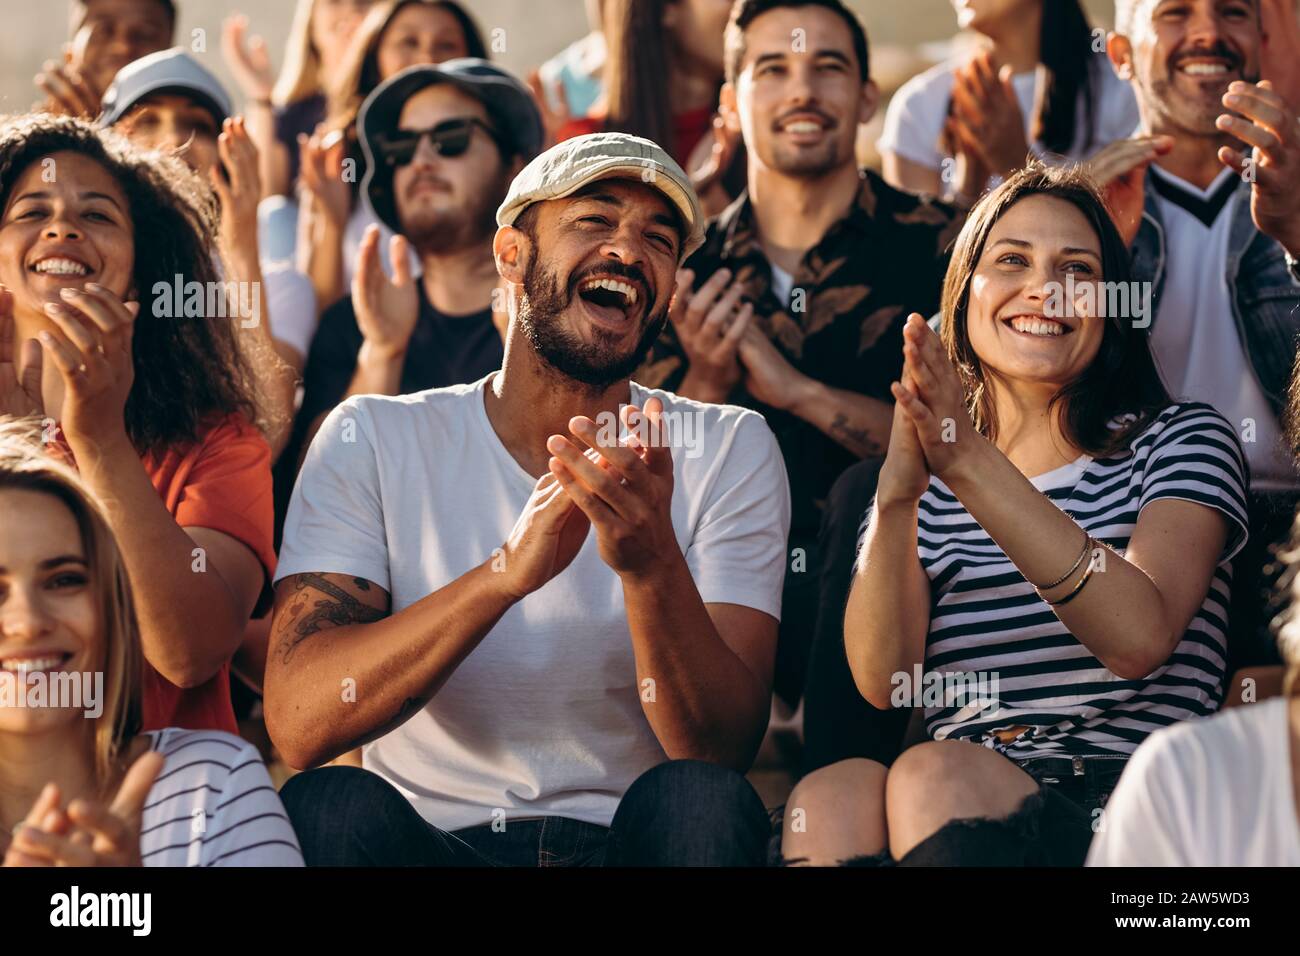 Group of people watching a sport event and cheering. Excited crowd of sports fans applauding sitting in stadium. Stock Photo